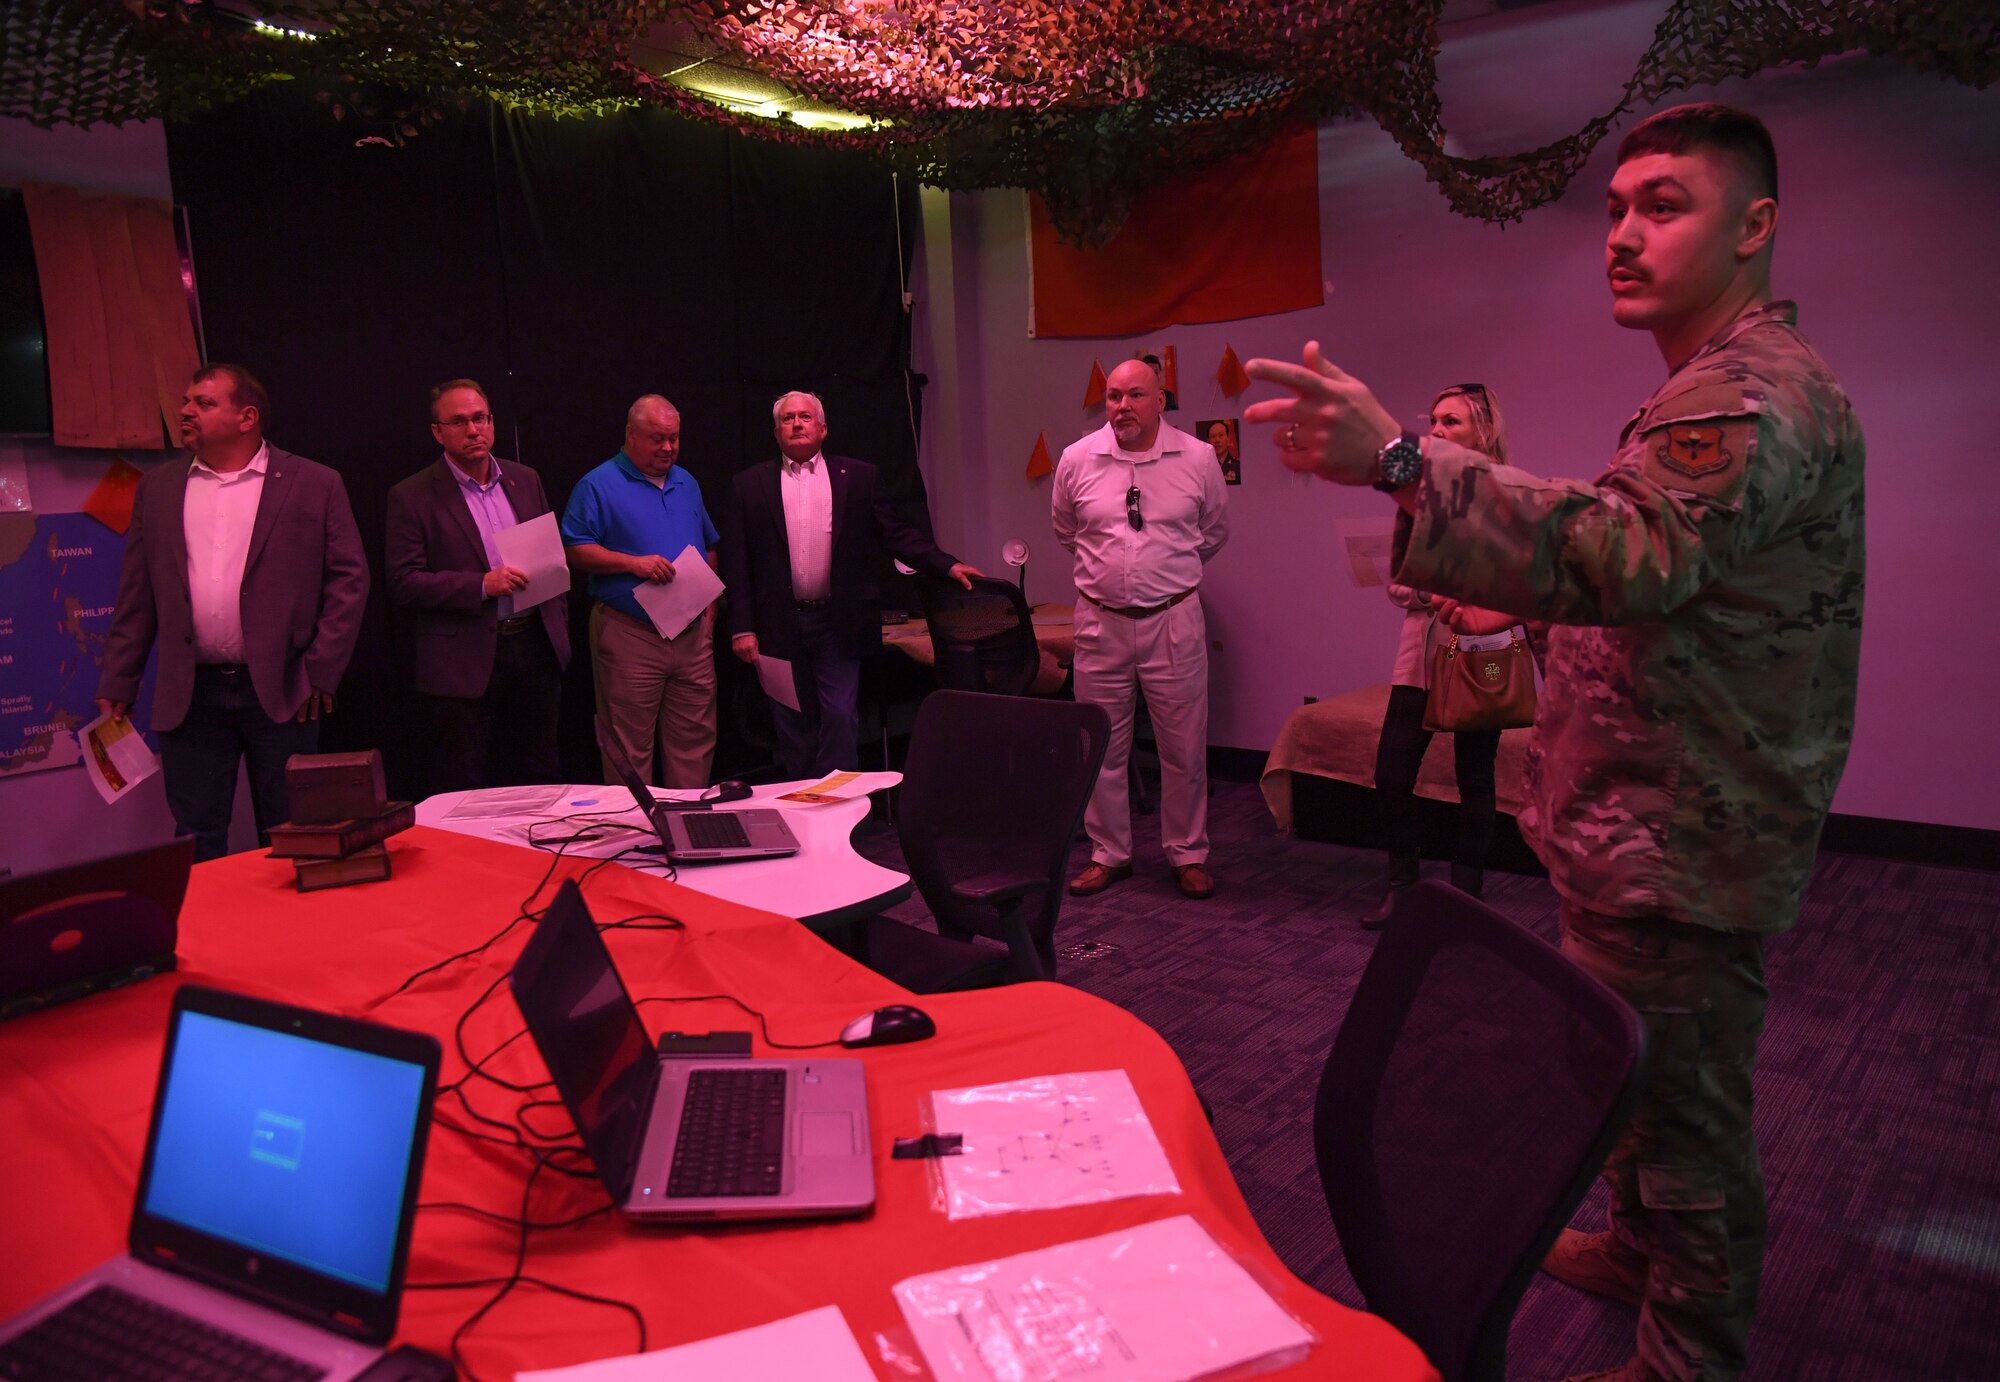 U.S. Air Force 1st Lt. Jesse Perkins, 333rd Training Squadron instructor, provides an overview of the cyber warfare training capabilities inside the 333rd TRS escape room to staff members of Congressman Mike Ezell, South Mississippi 4th Congressional District representative, during an immersion tour inside Stennis Hall at Keesler Air Force Base, Mississippi, Feb. 15, 2023.